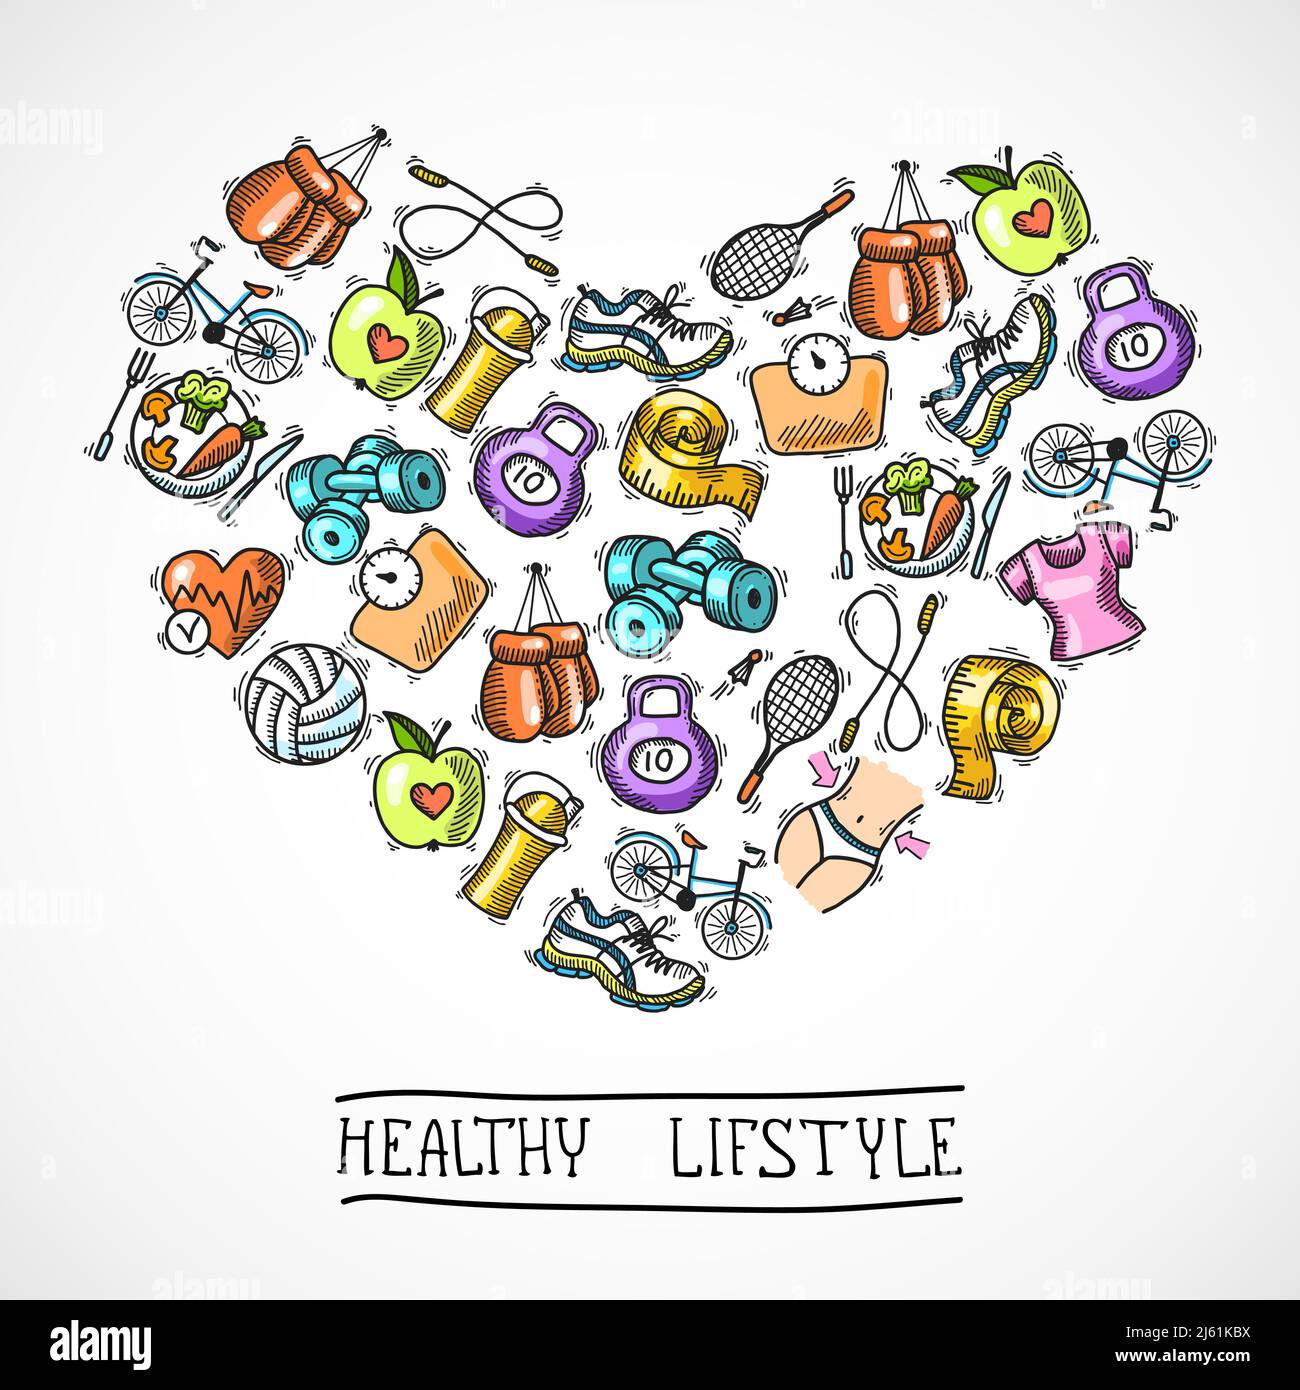 Healthy Lifestyle Doodle Set Stock Vector (Royalty Free) 84811573 |  Shutterstock